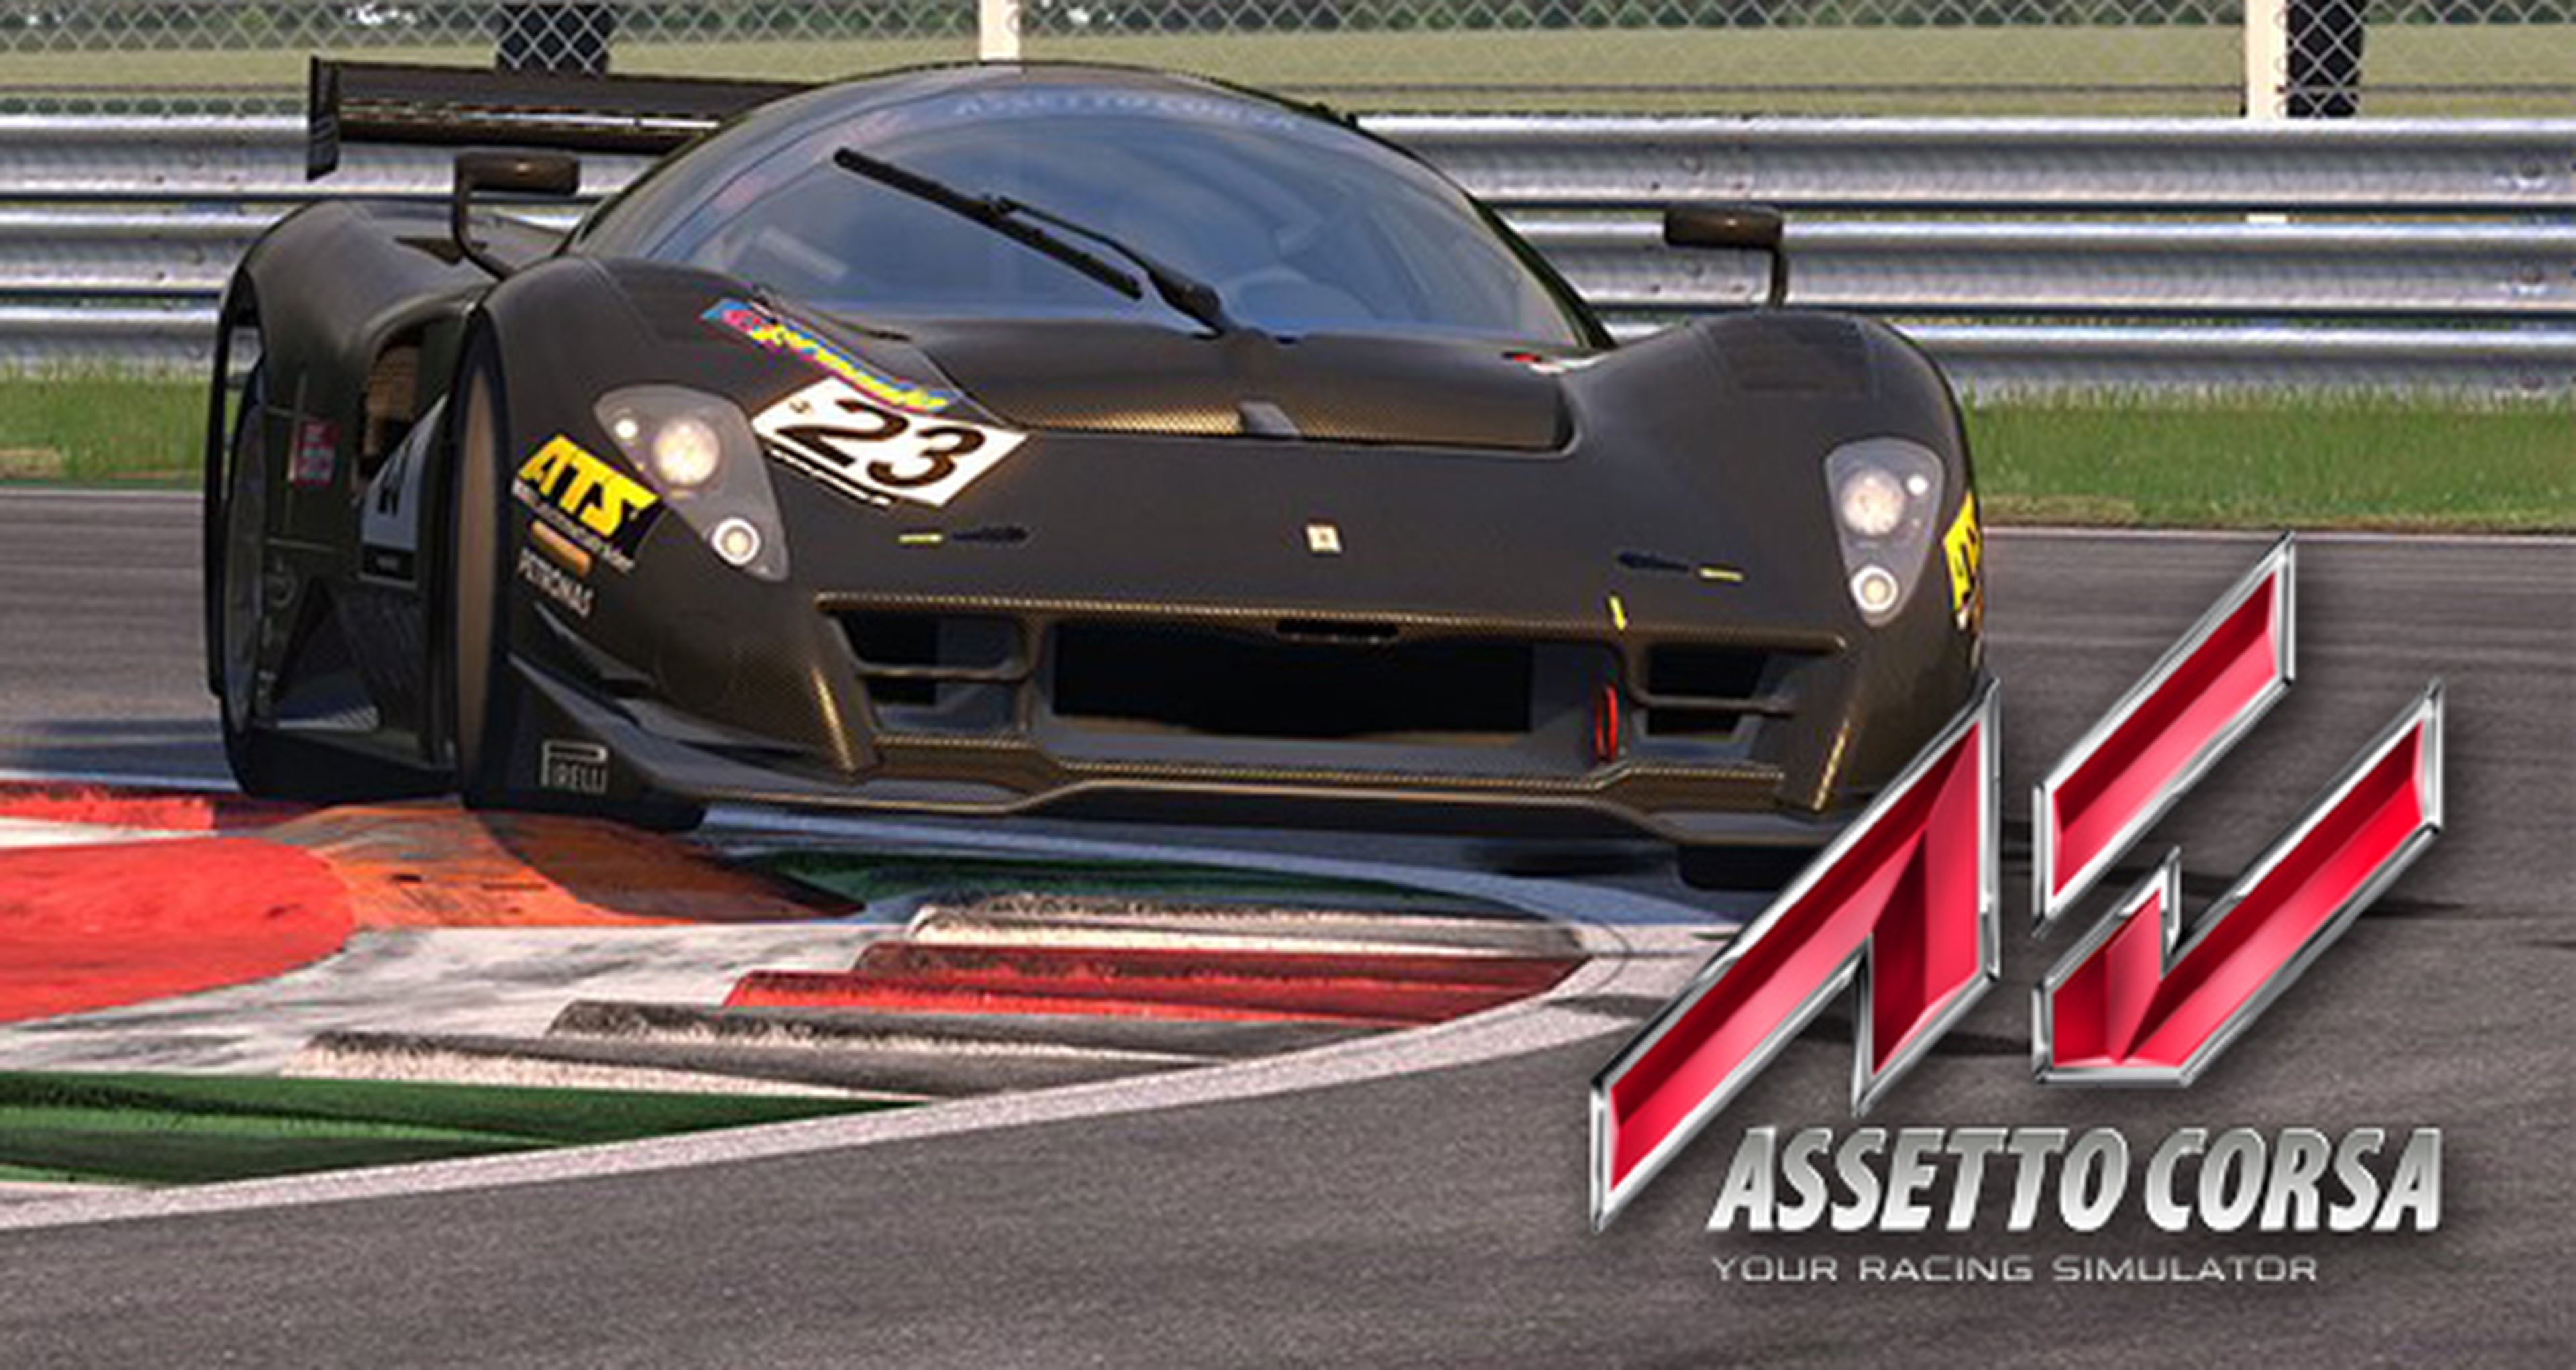 Assetto Corsa - Avance para PS4 y Xbox One